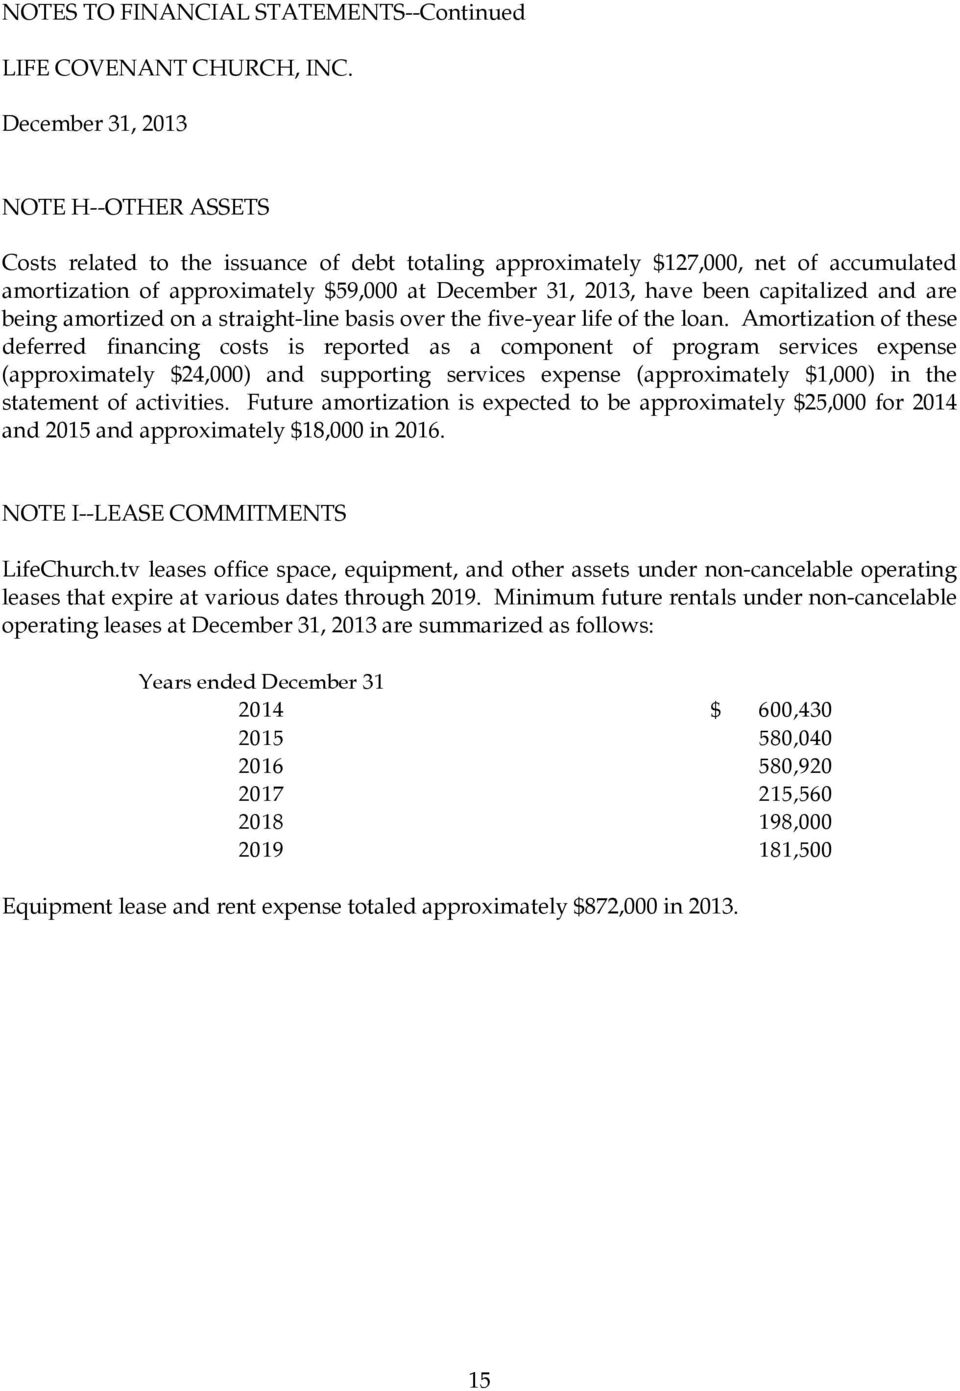 Amortization of these deferred financing costs is reported as a component of program services expense (approximately $24,000) and supporting services expense (approximately $1,000) in the statement